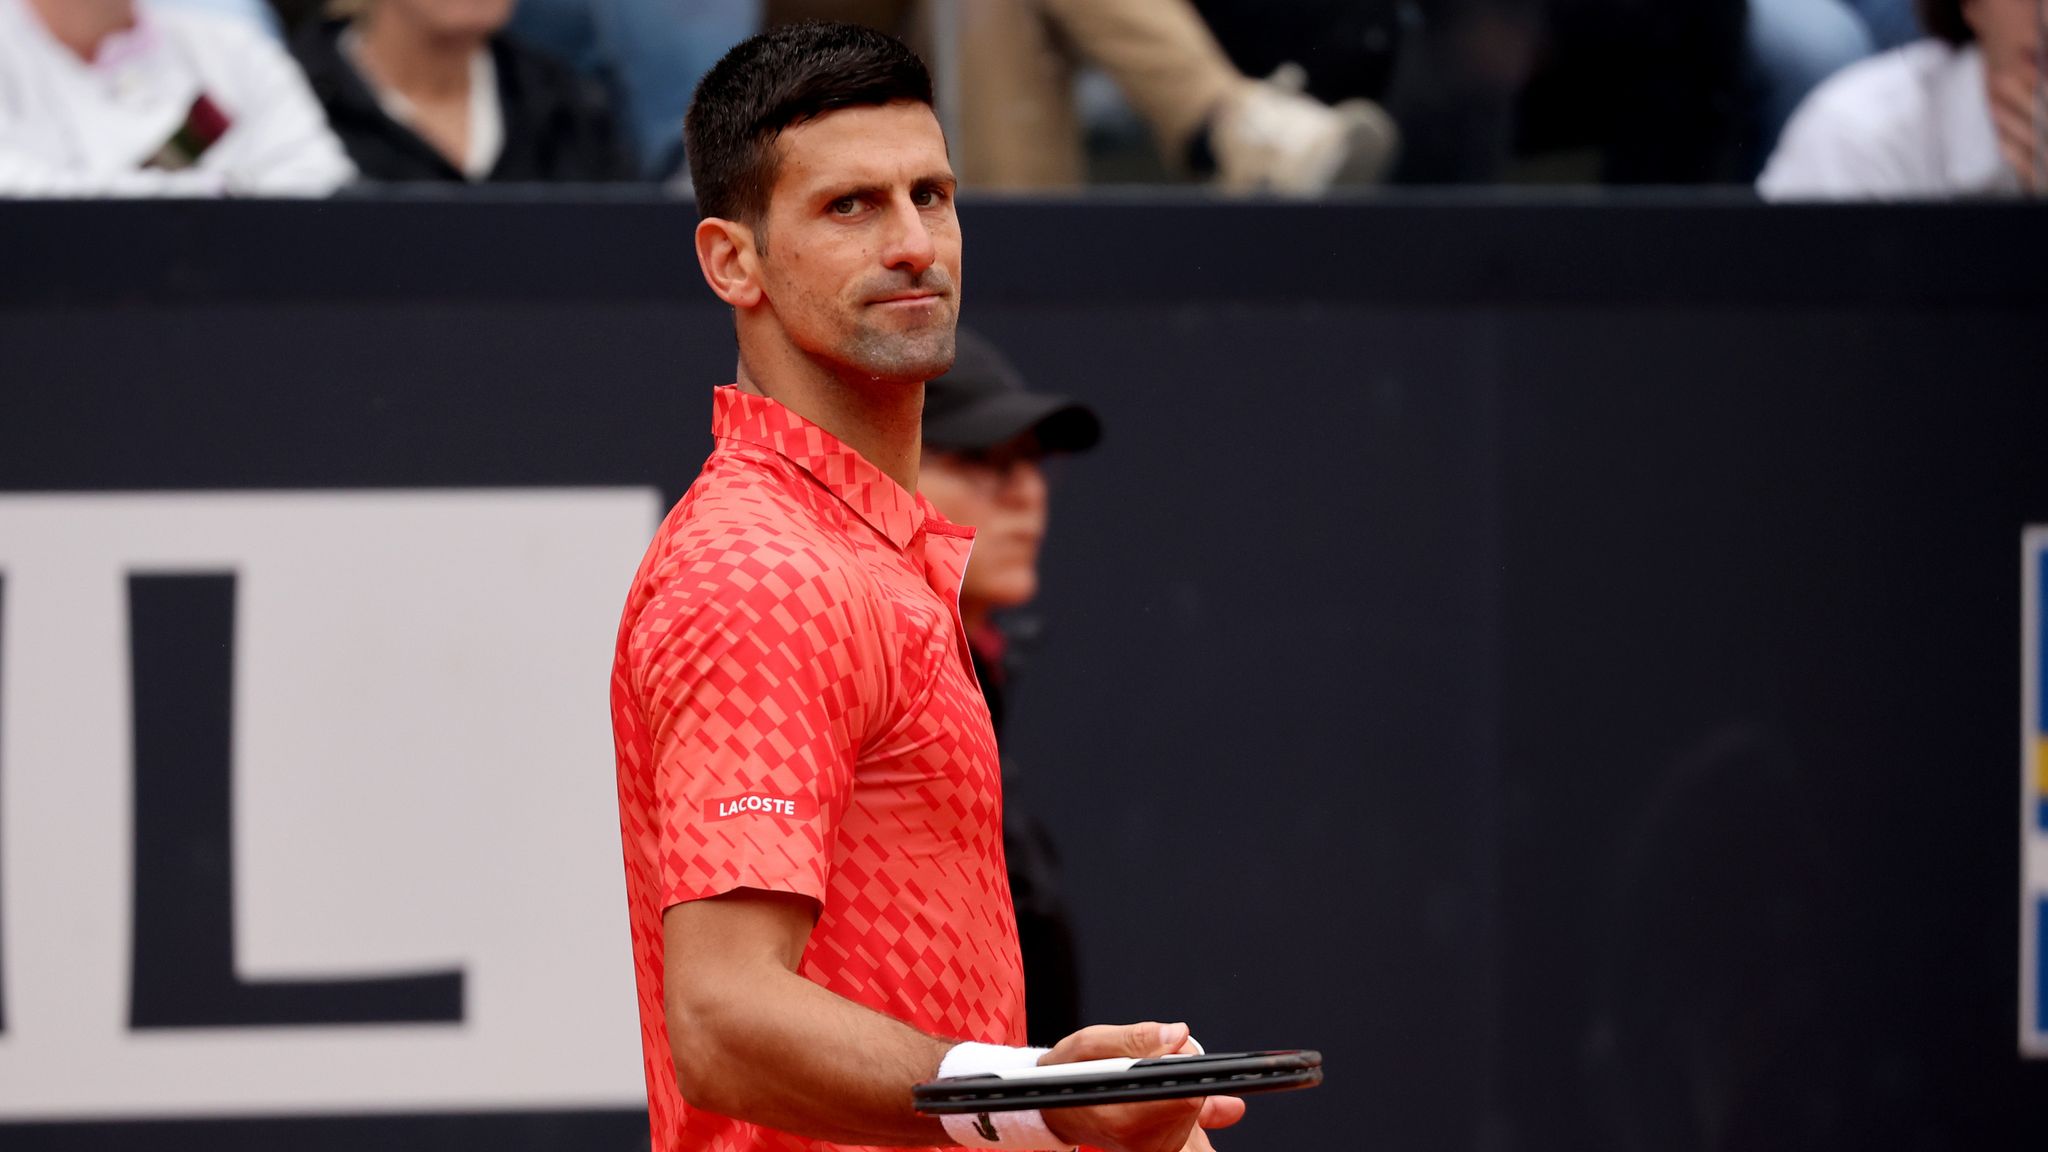 Djokovic explained Norrie confrontation